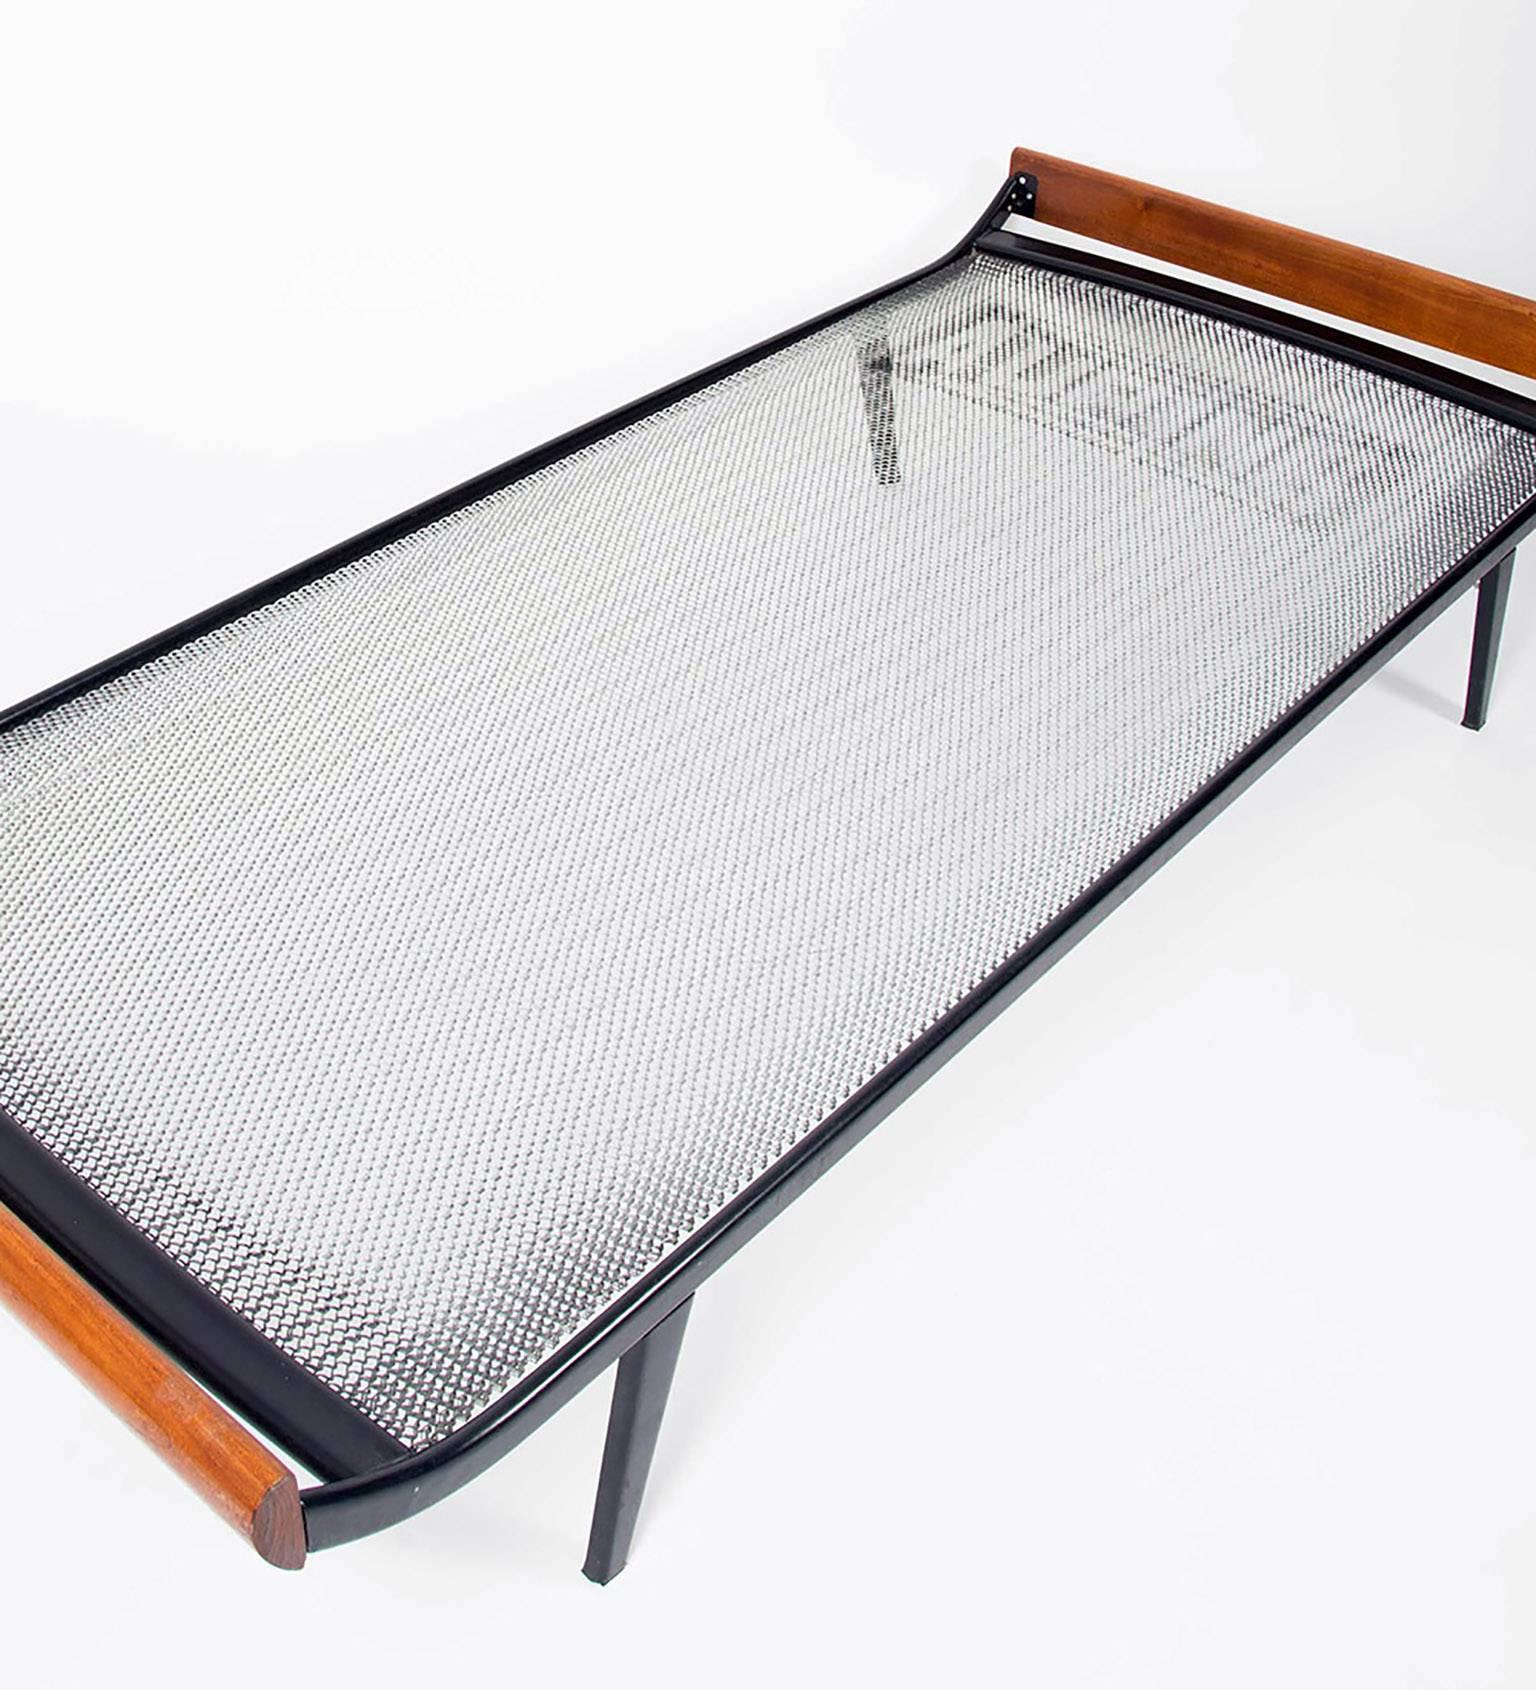 The Cleopatra daybed was designed in 1953 by Dick Cordemeijer for Auping as a beautiful modernist design.